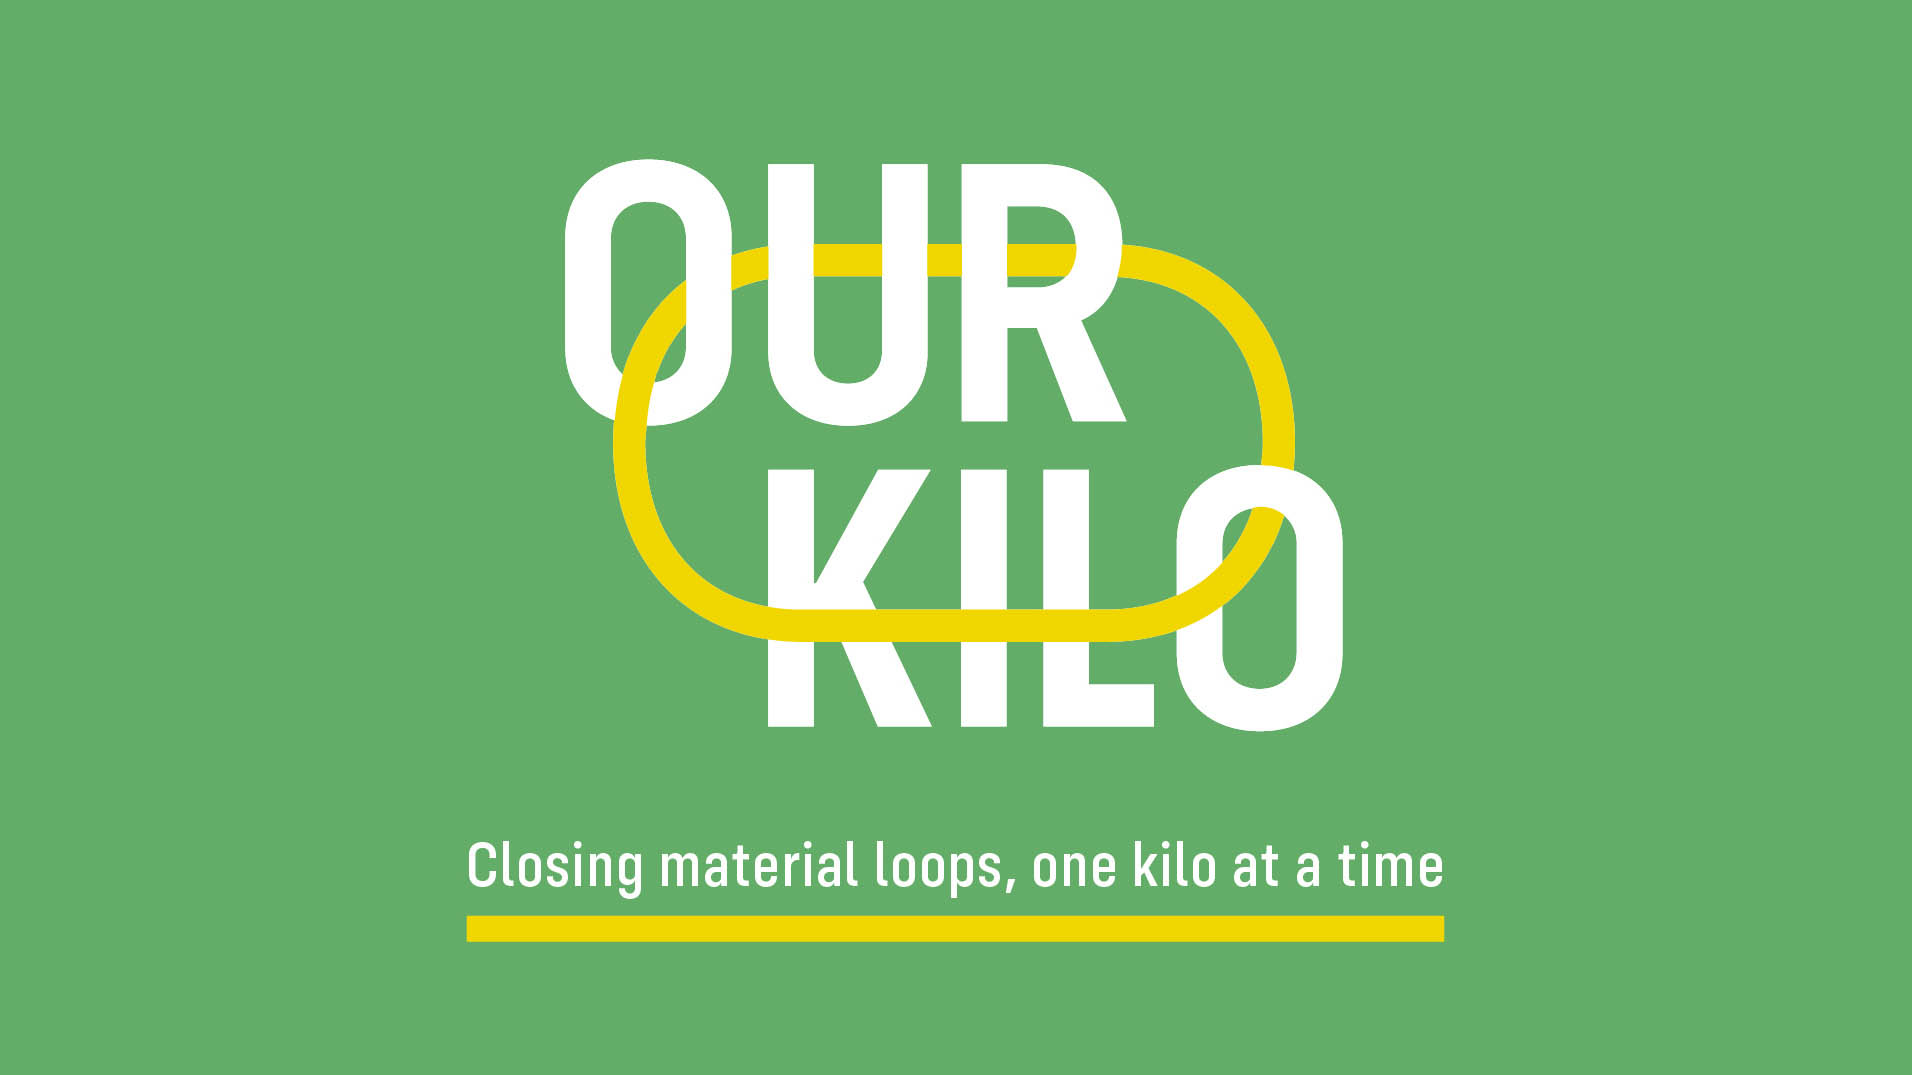 OURKILO - Closing material loops, one kilo at a time